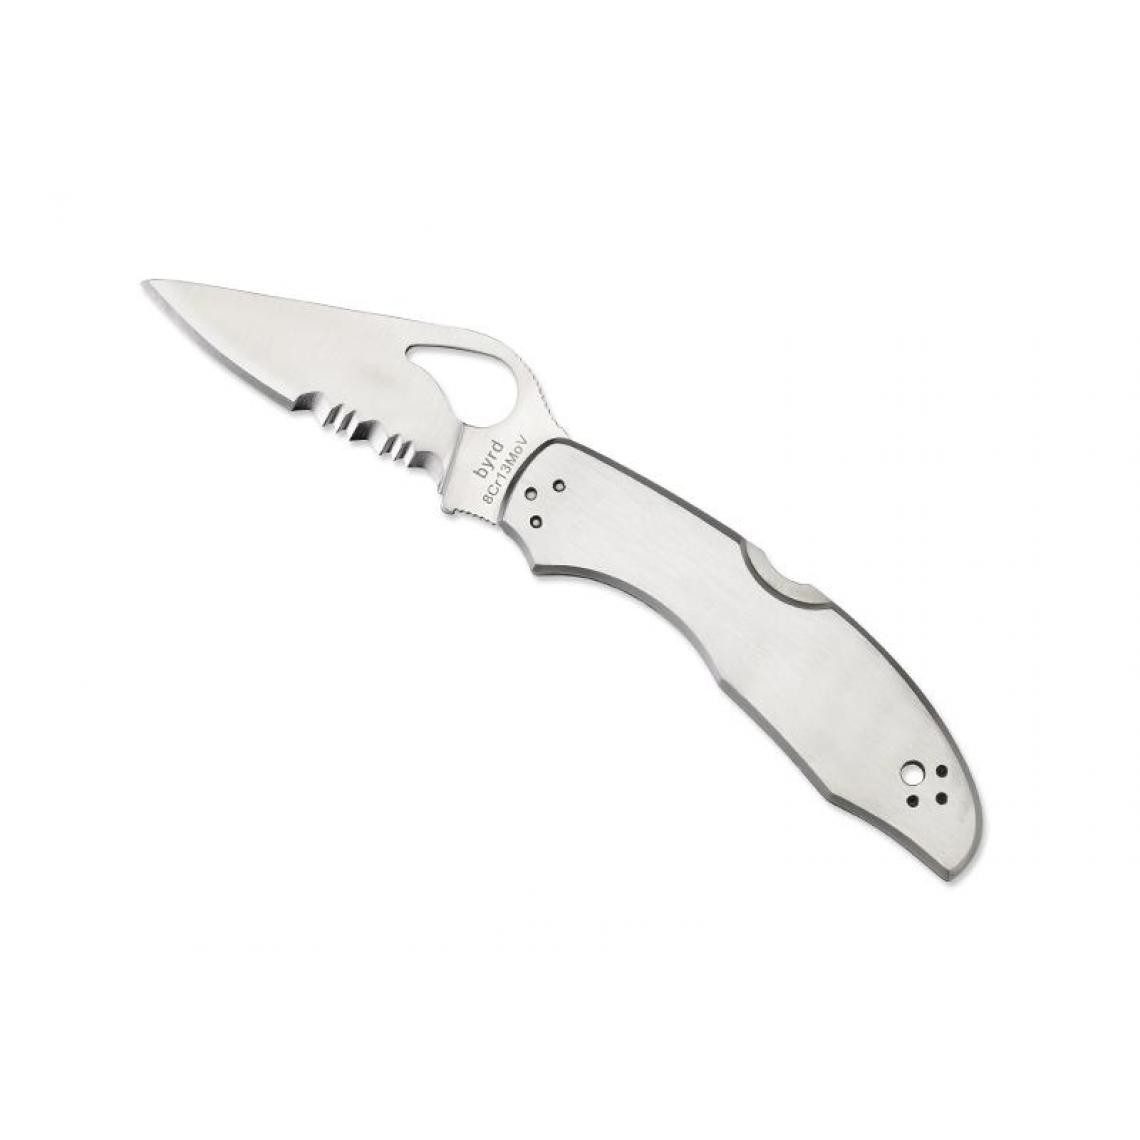 Divers Marques - BYRD KNIFE - BY04PS2 - COUTEAU BYRD MEADOWLARK 2 TOUT INOX - Outils de coupe